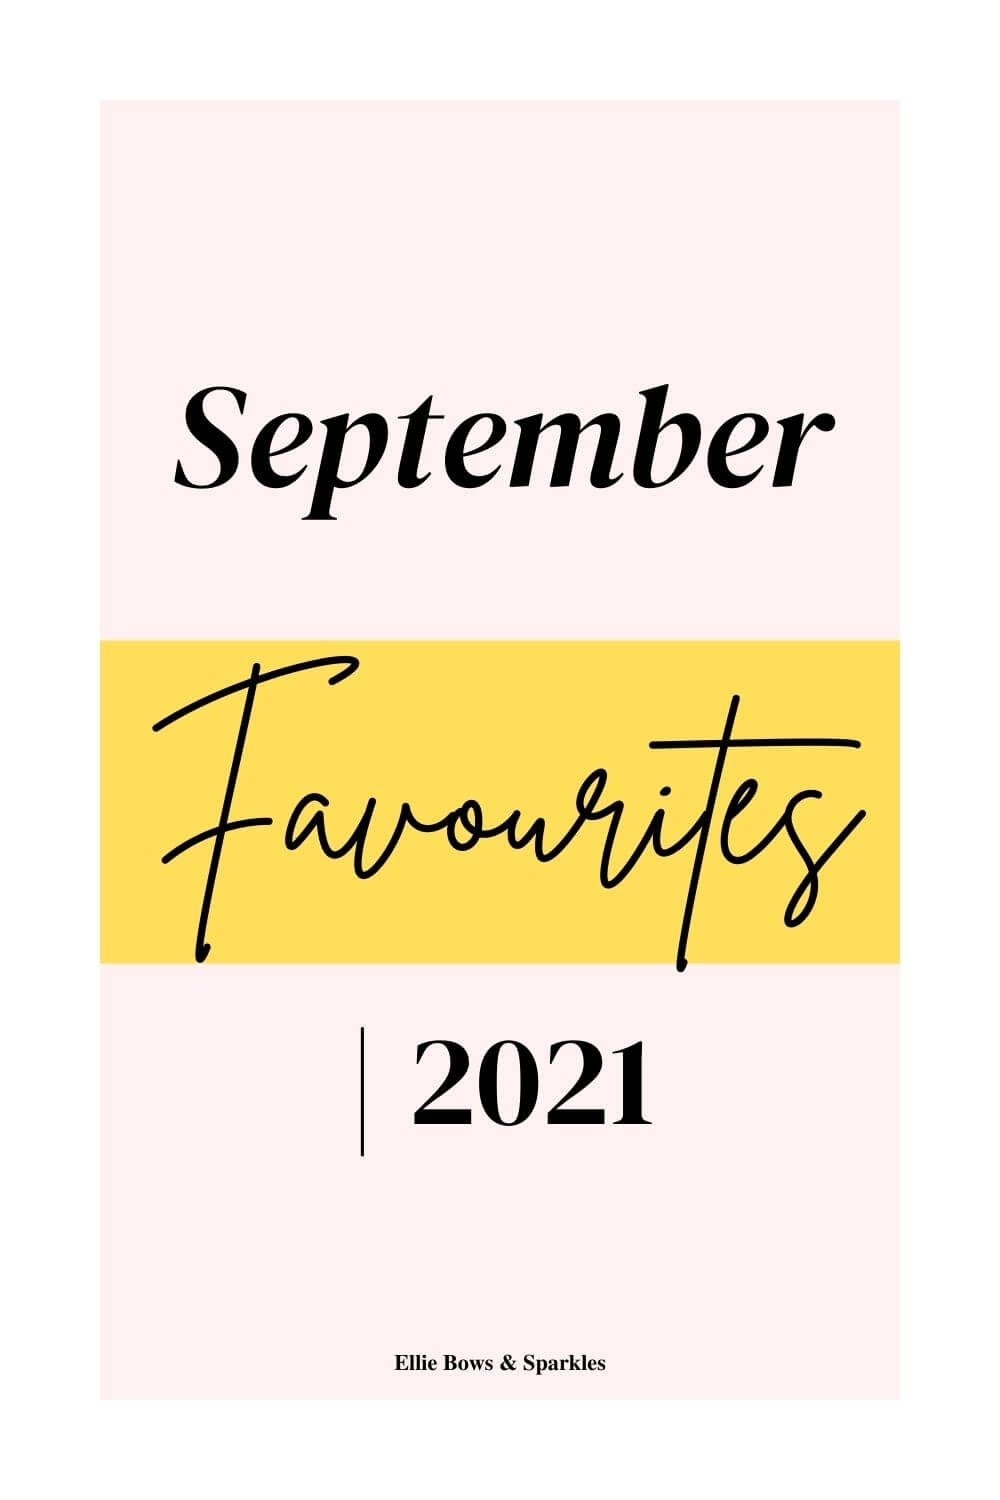 Pink Pinterest pin, with large bold and handwritten tittle reading September Favourites 2021, with a yellow striped accent across the centre of the pin behind the word "favourites".